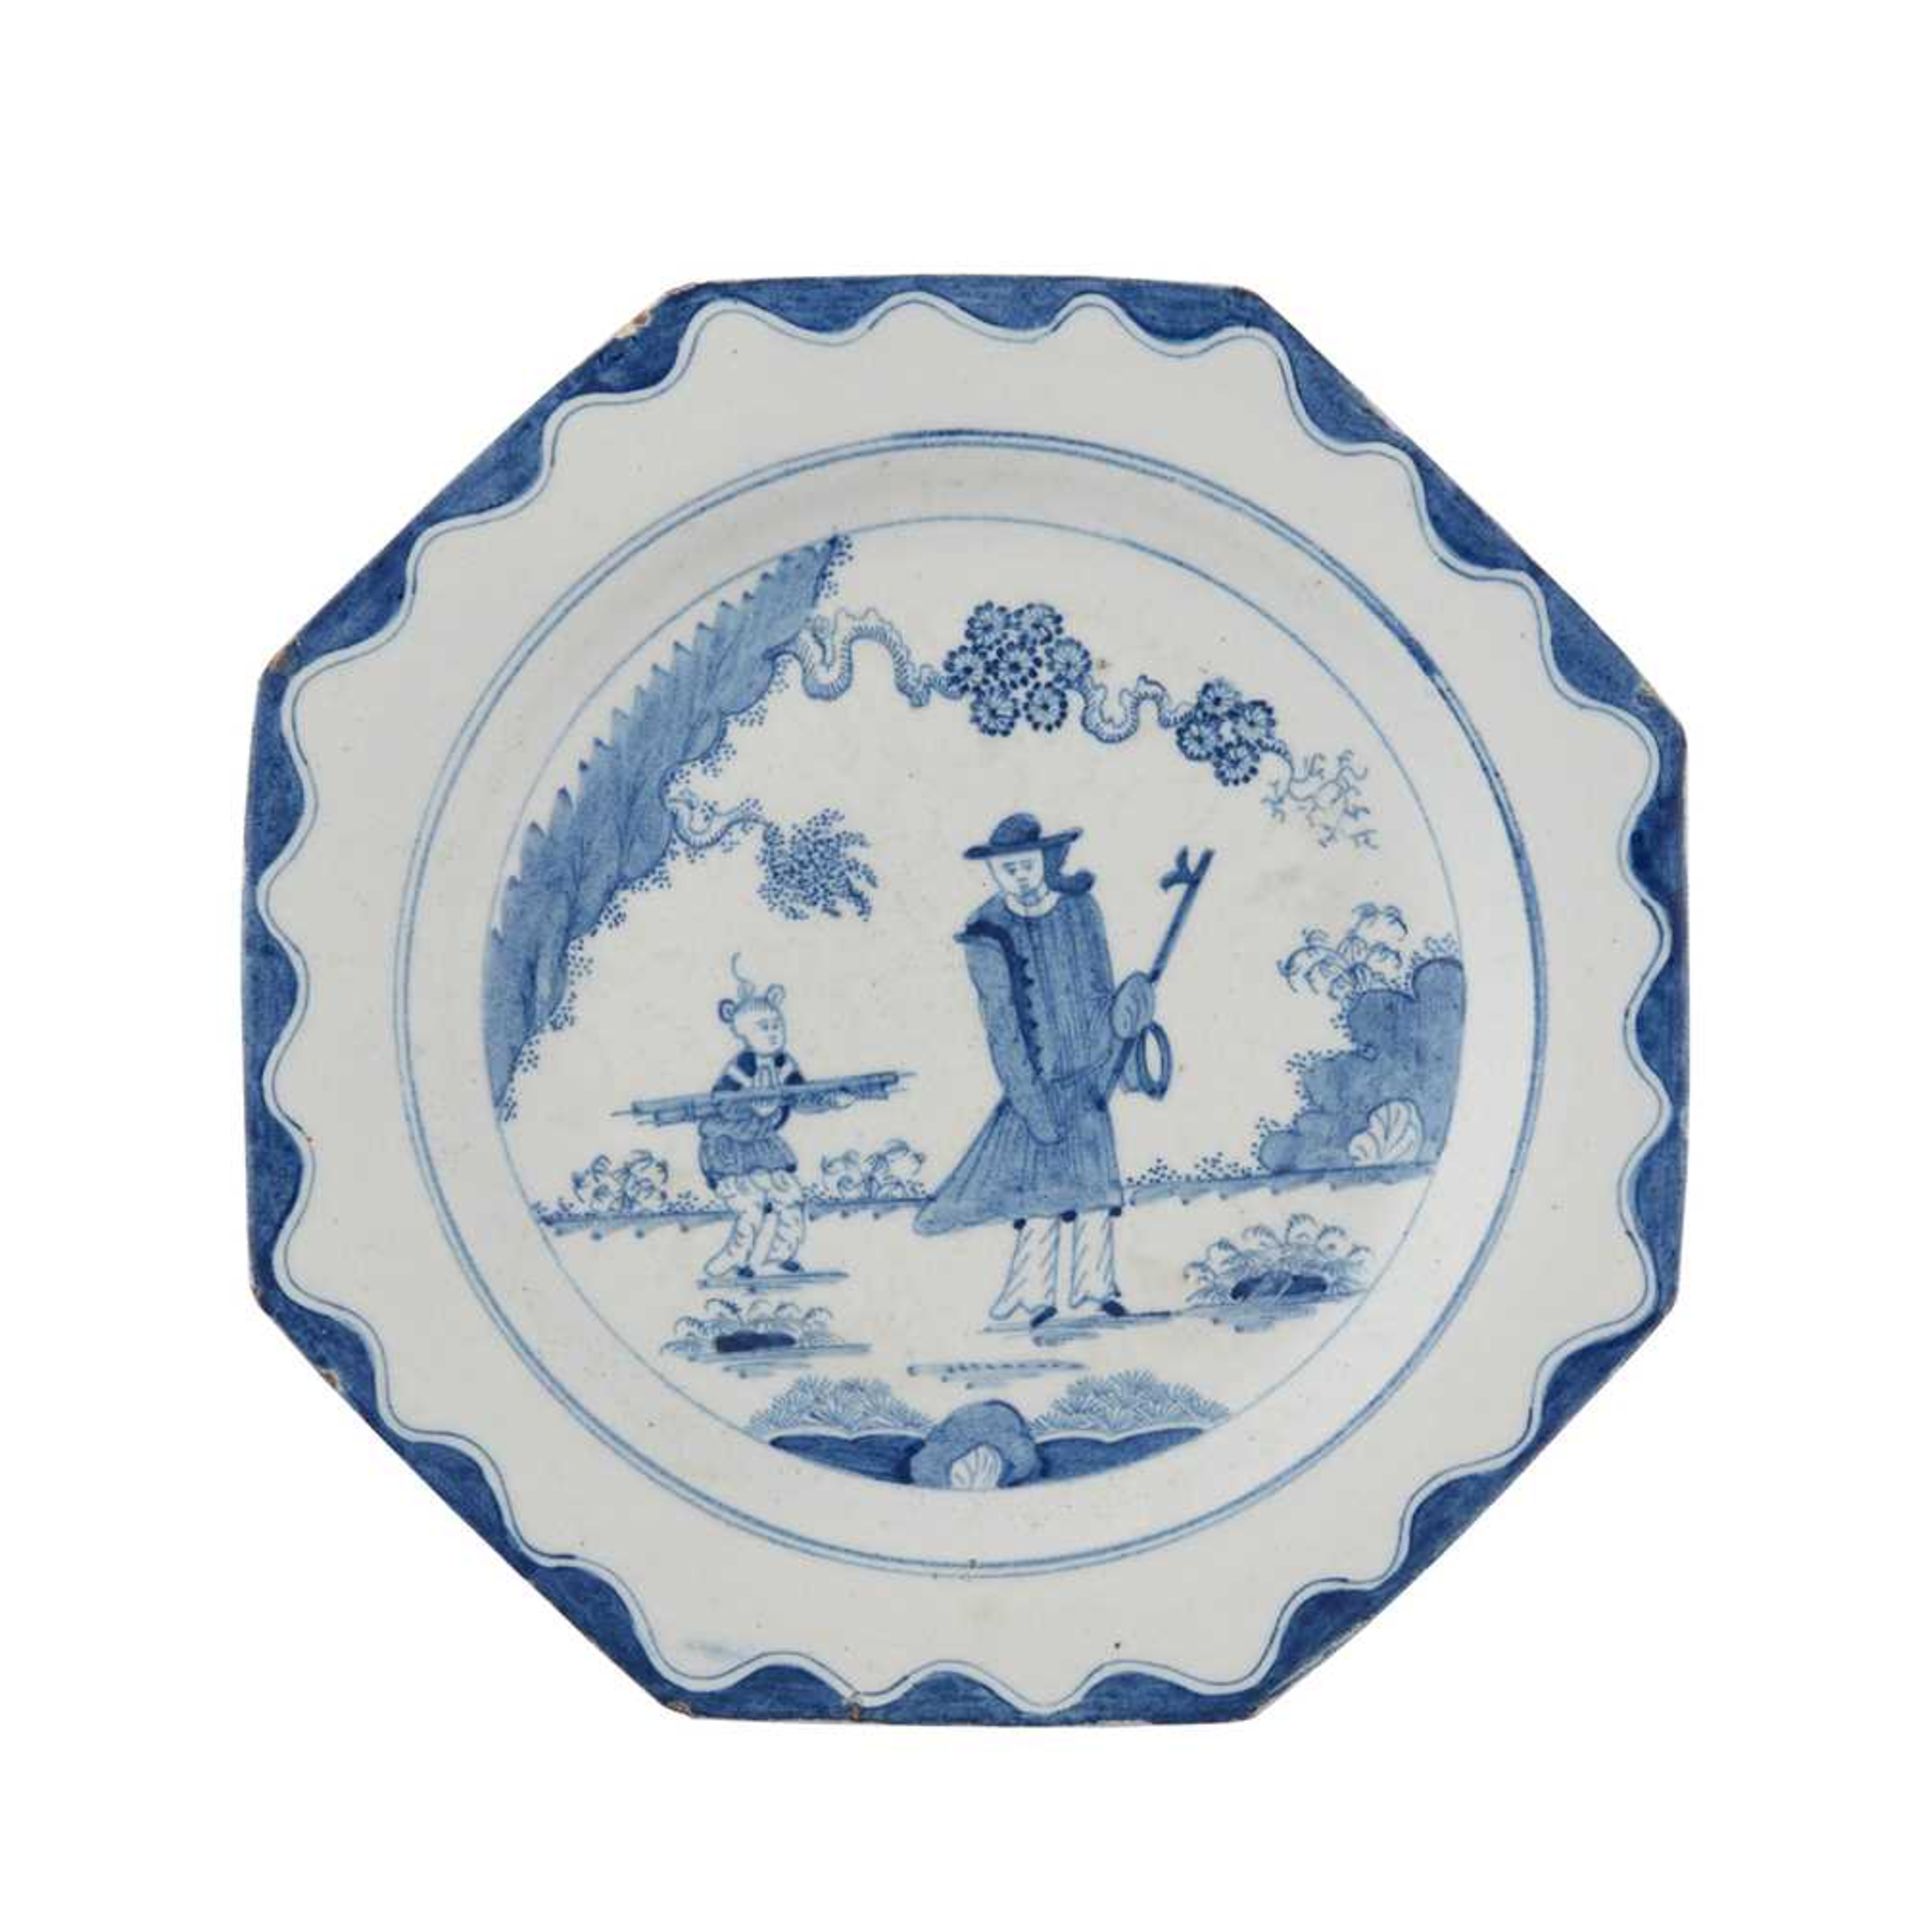 BOW OCTAGONAL GOLFER AND CADDY PATTERN BLUE PAINTED PLATE CIRCA 1760